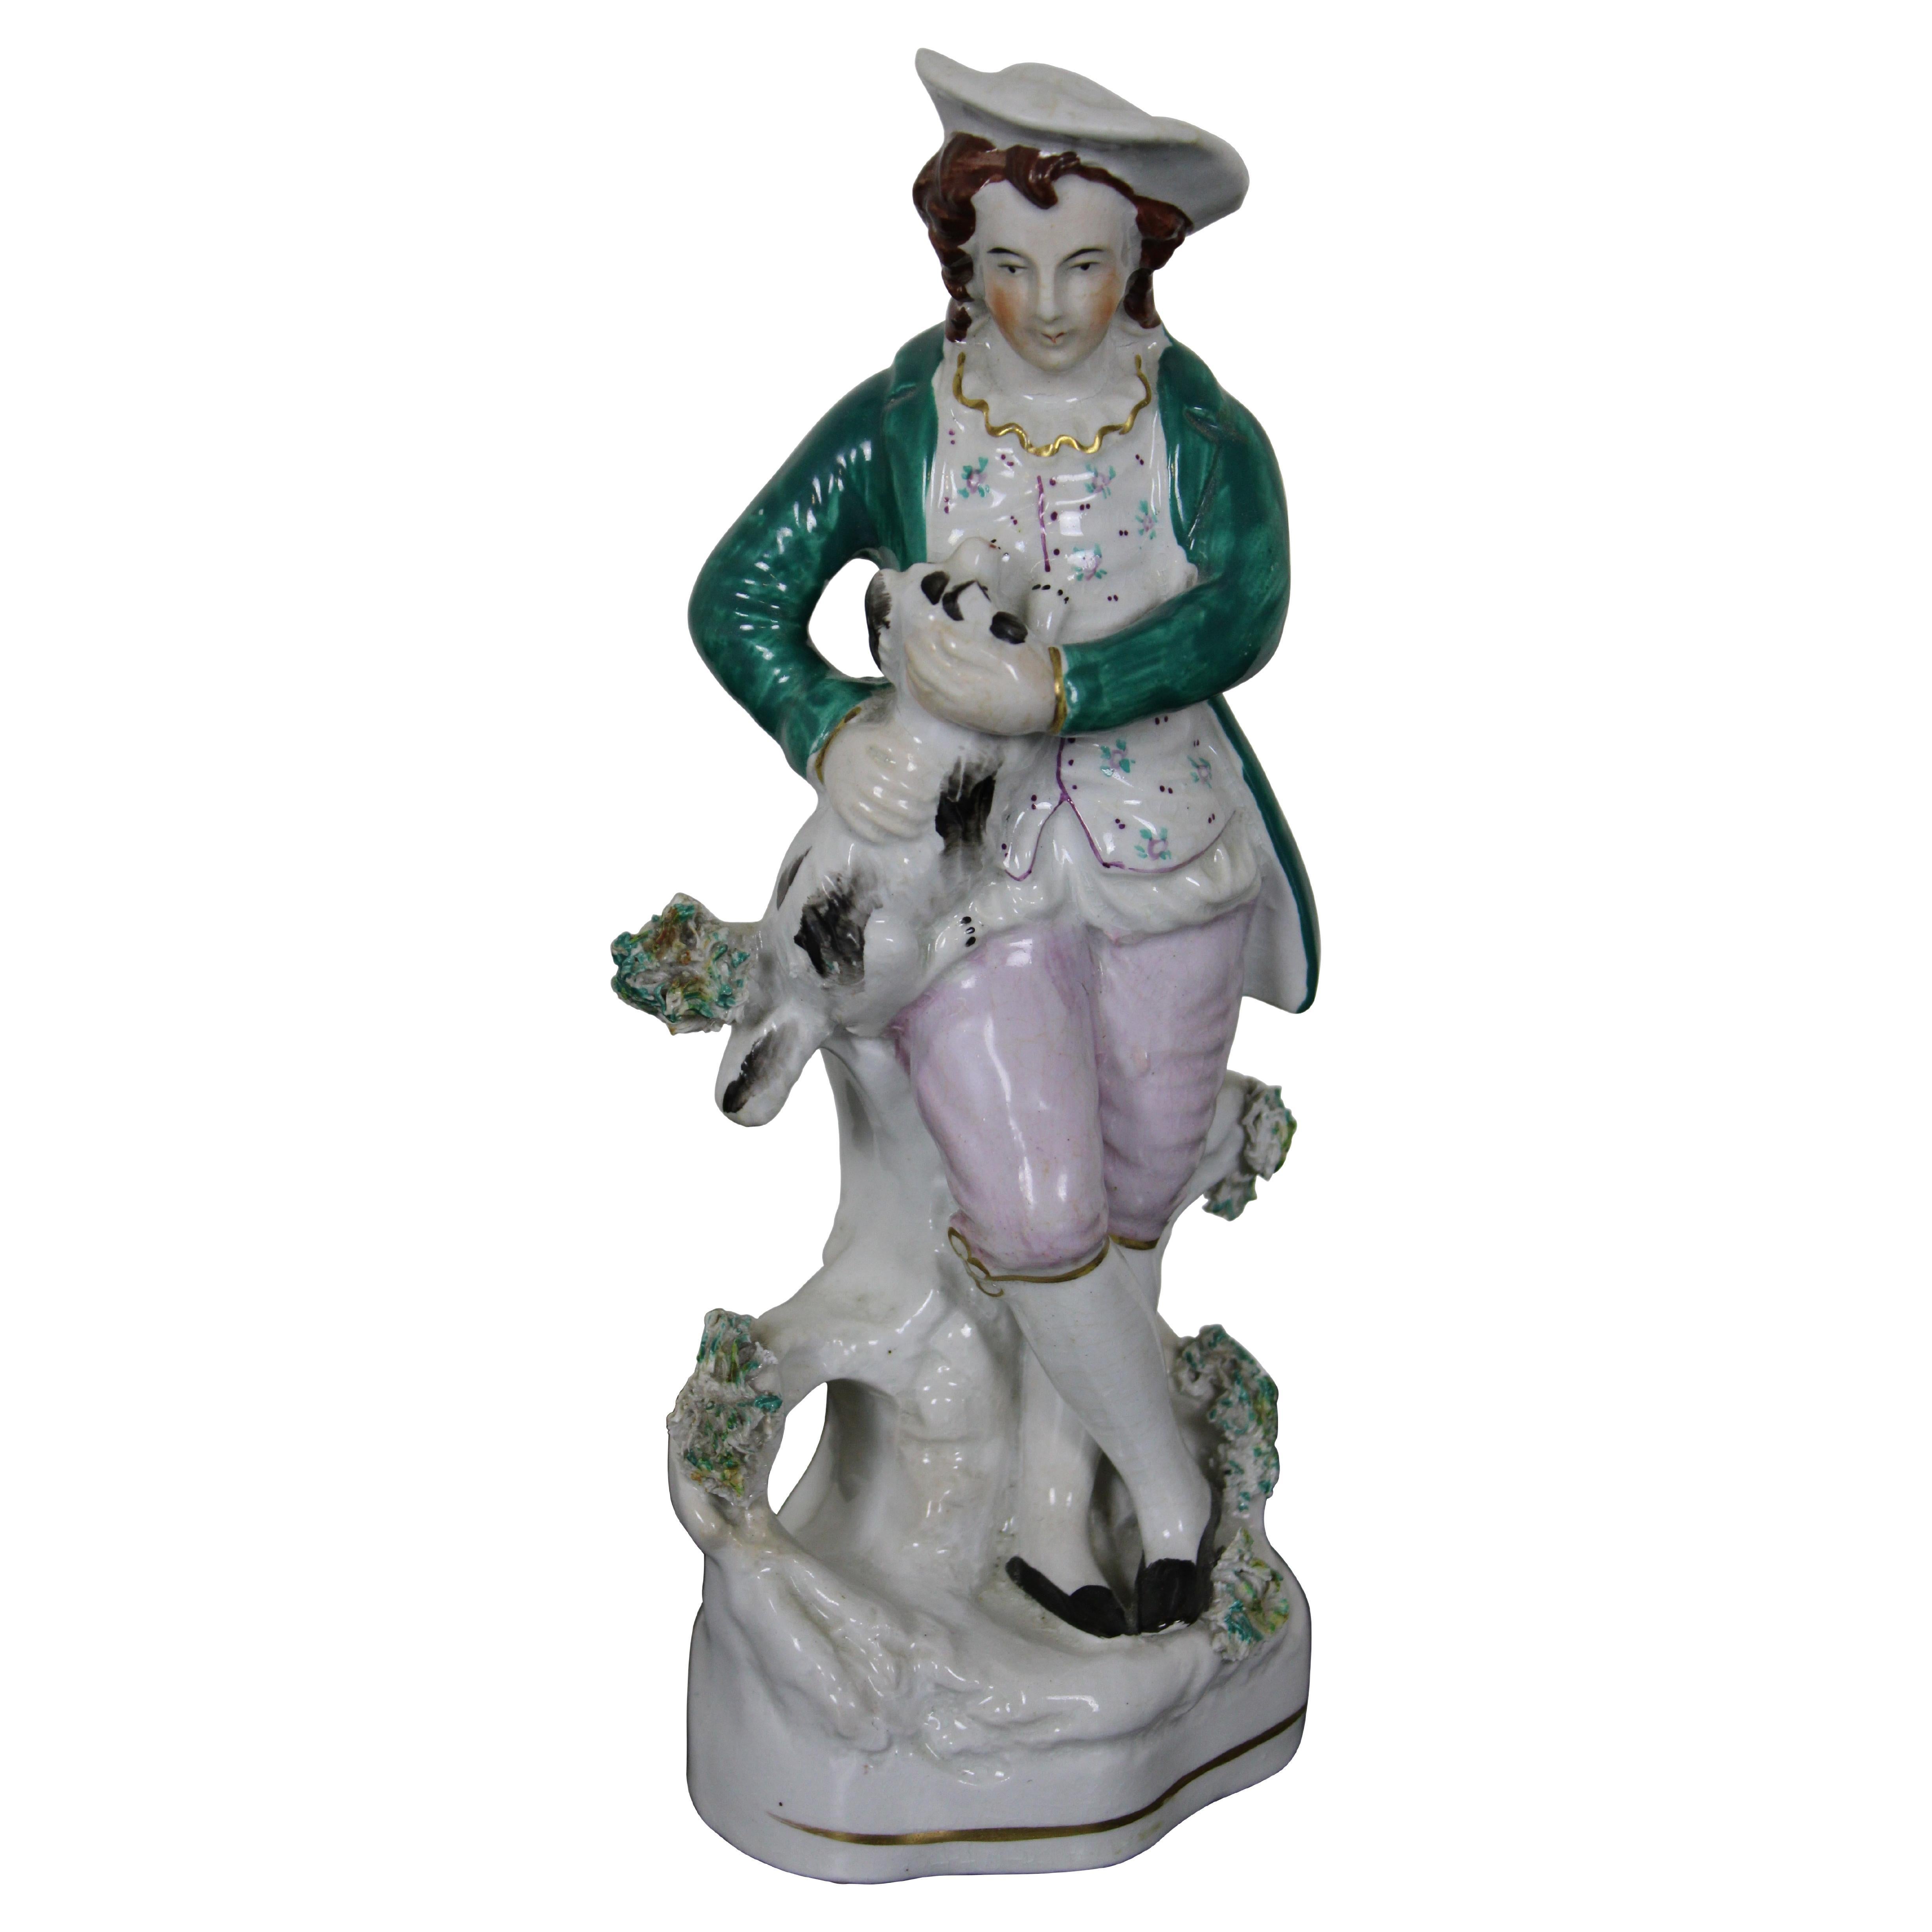 Antique English Staffordshire Porcelain Figurine Man with Spotted Dog